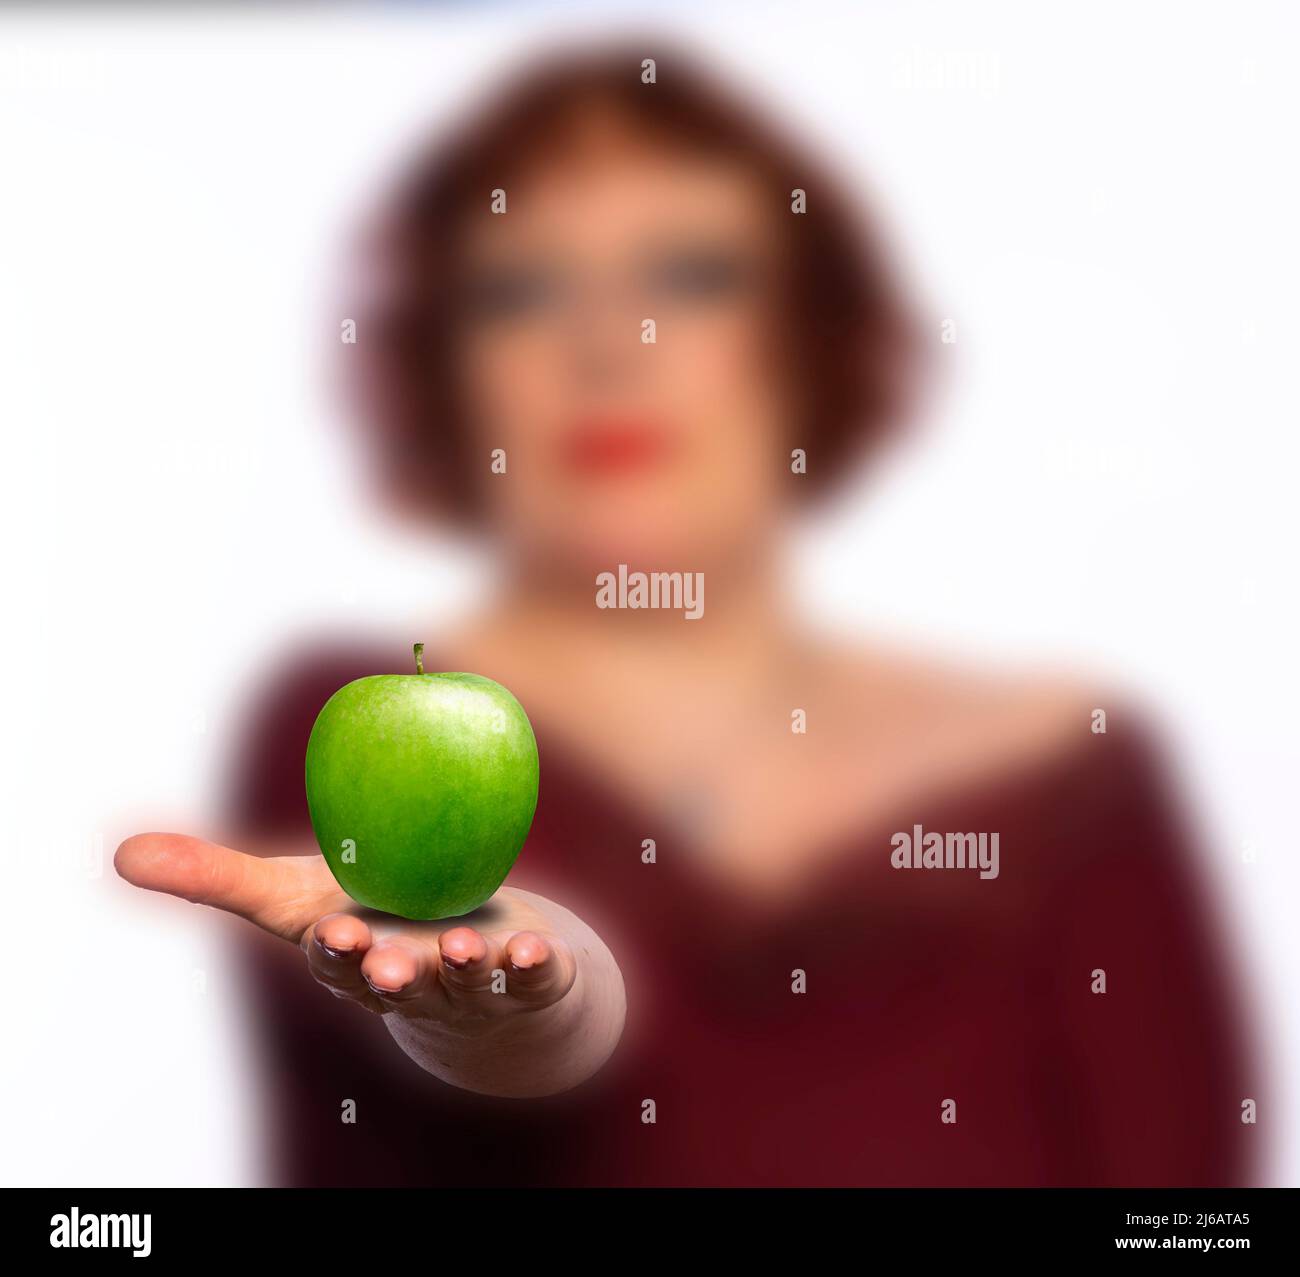 Woman offering a green apple Stock Photo